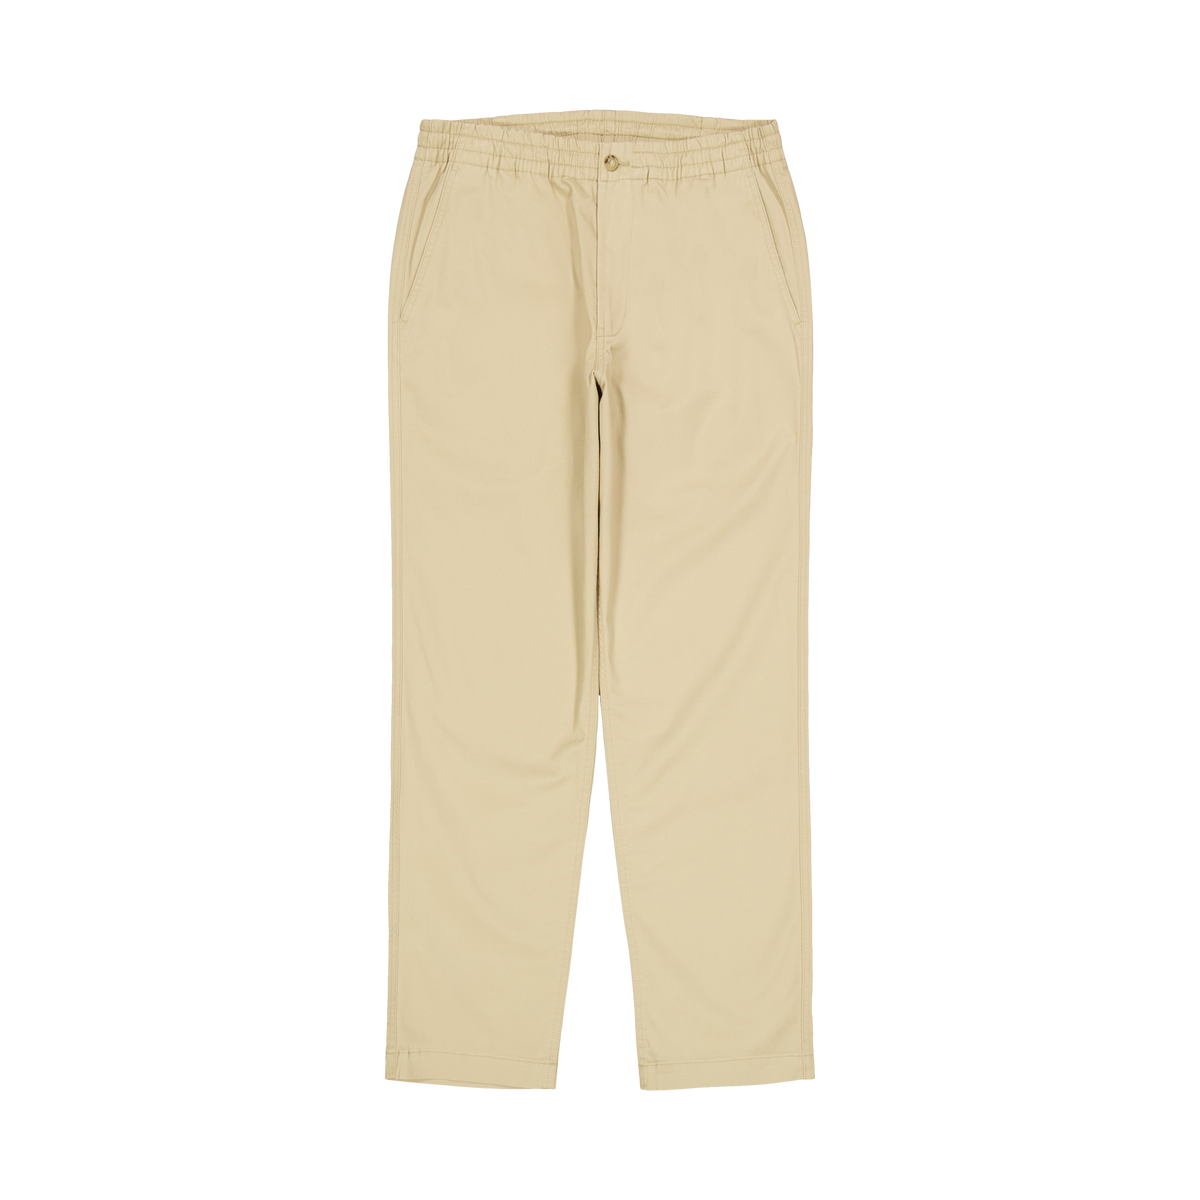 Polo Ralph Lauren Relaxed Fit Polo Prepster Twil 033 Classic Khaki